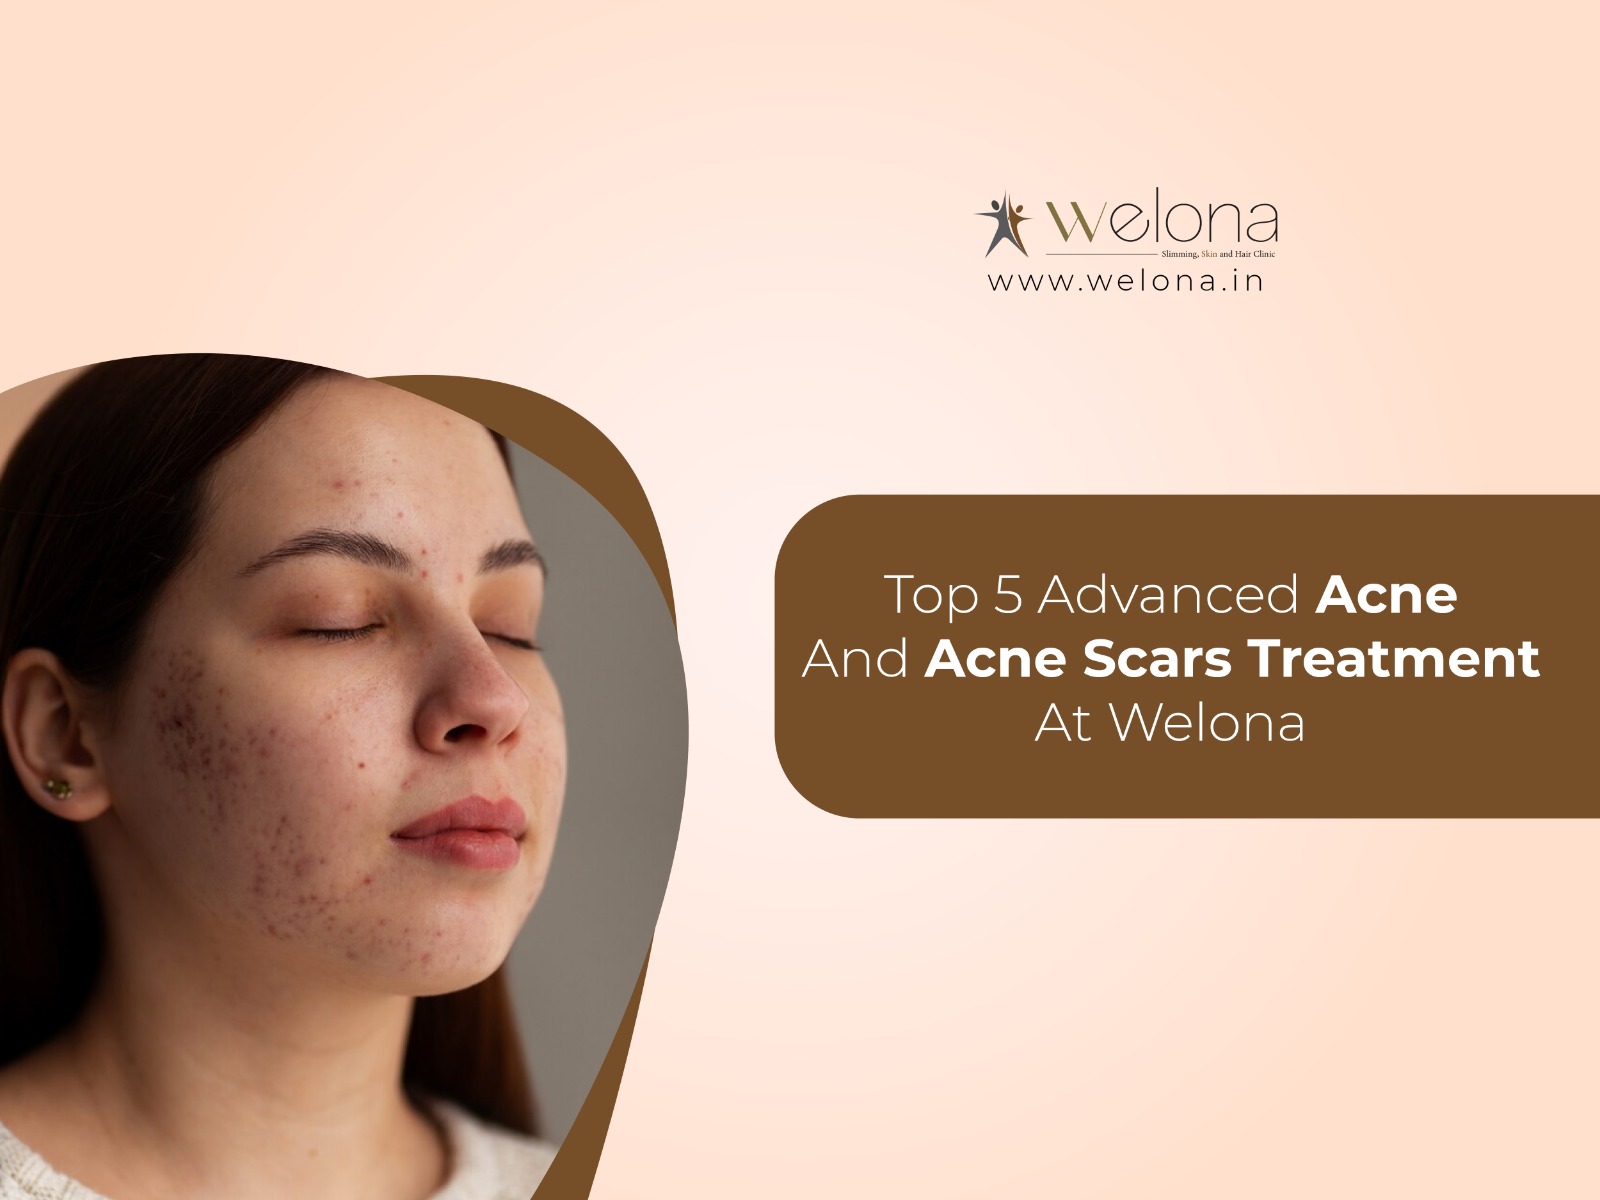 Top 5 Advanced Acne And Acne Scar Treatment At Welona